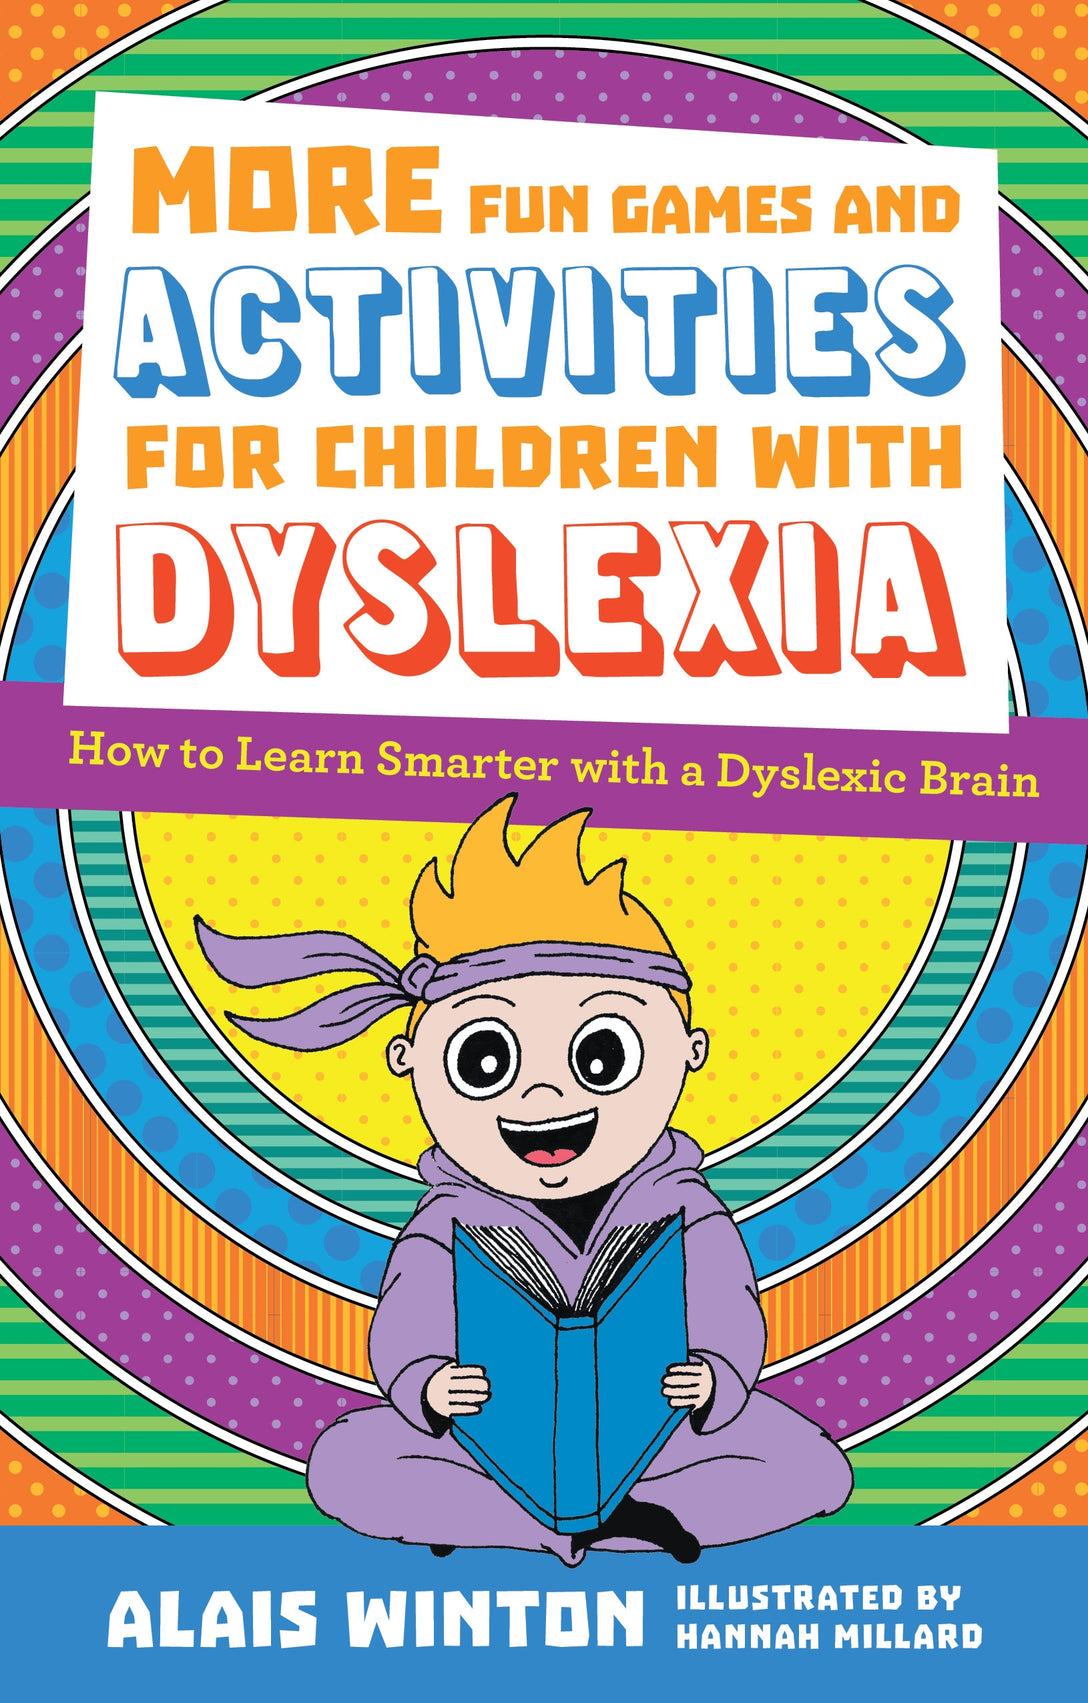 More Fun Games and Activities for Children with Dyslexia by Alais Winton, Hannah Millard